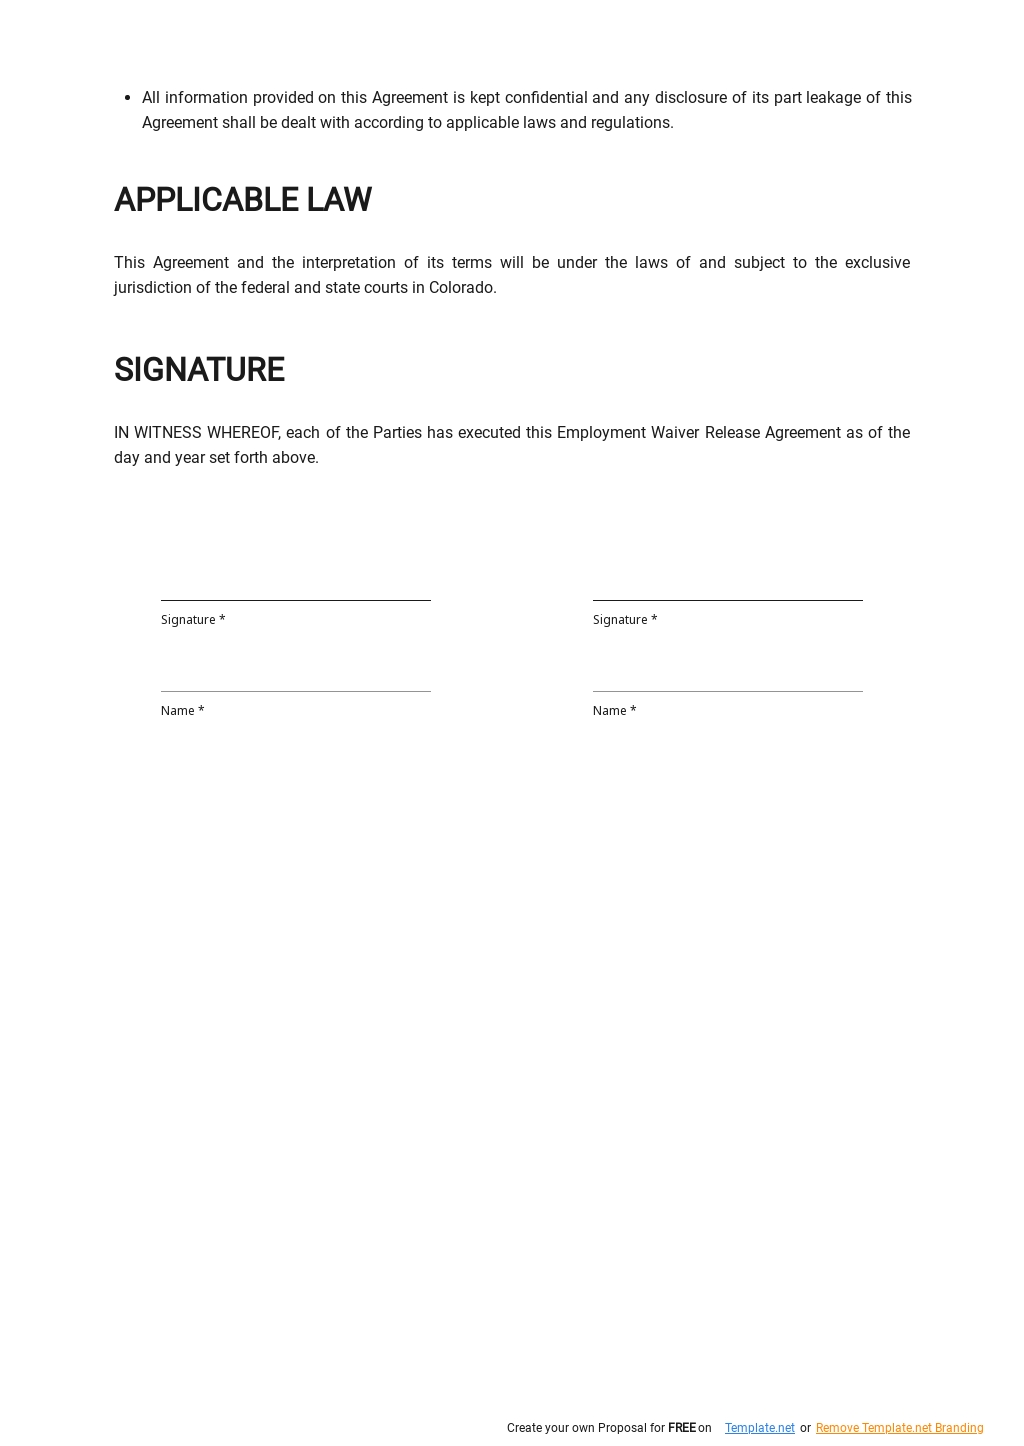 Employment Waiver Release Agreement Template 2.jpe